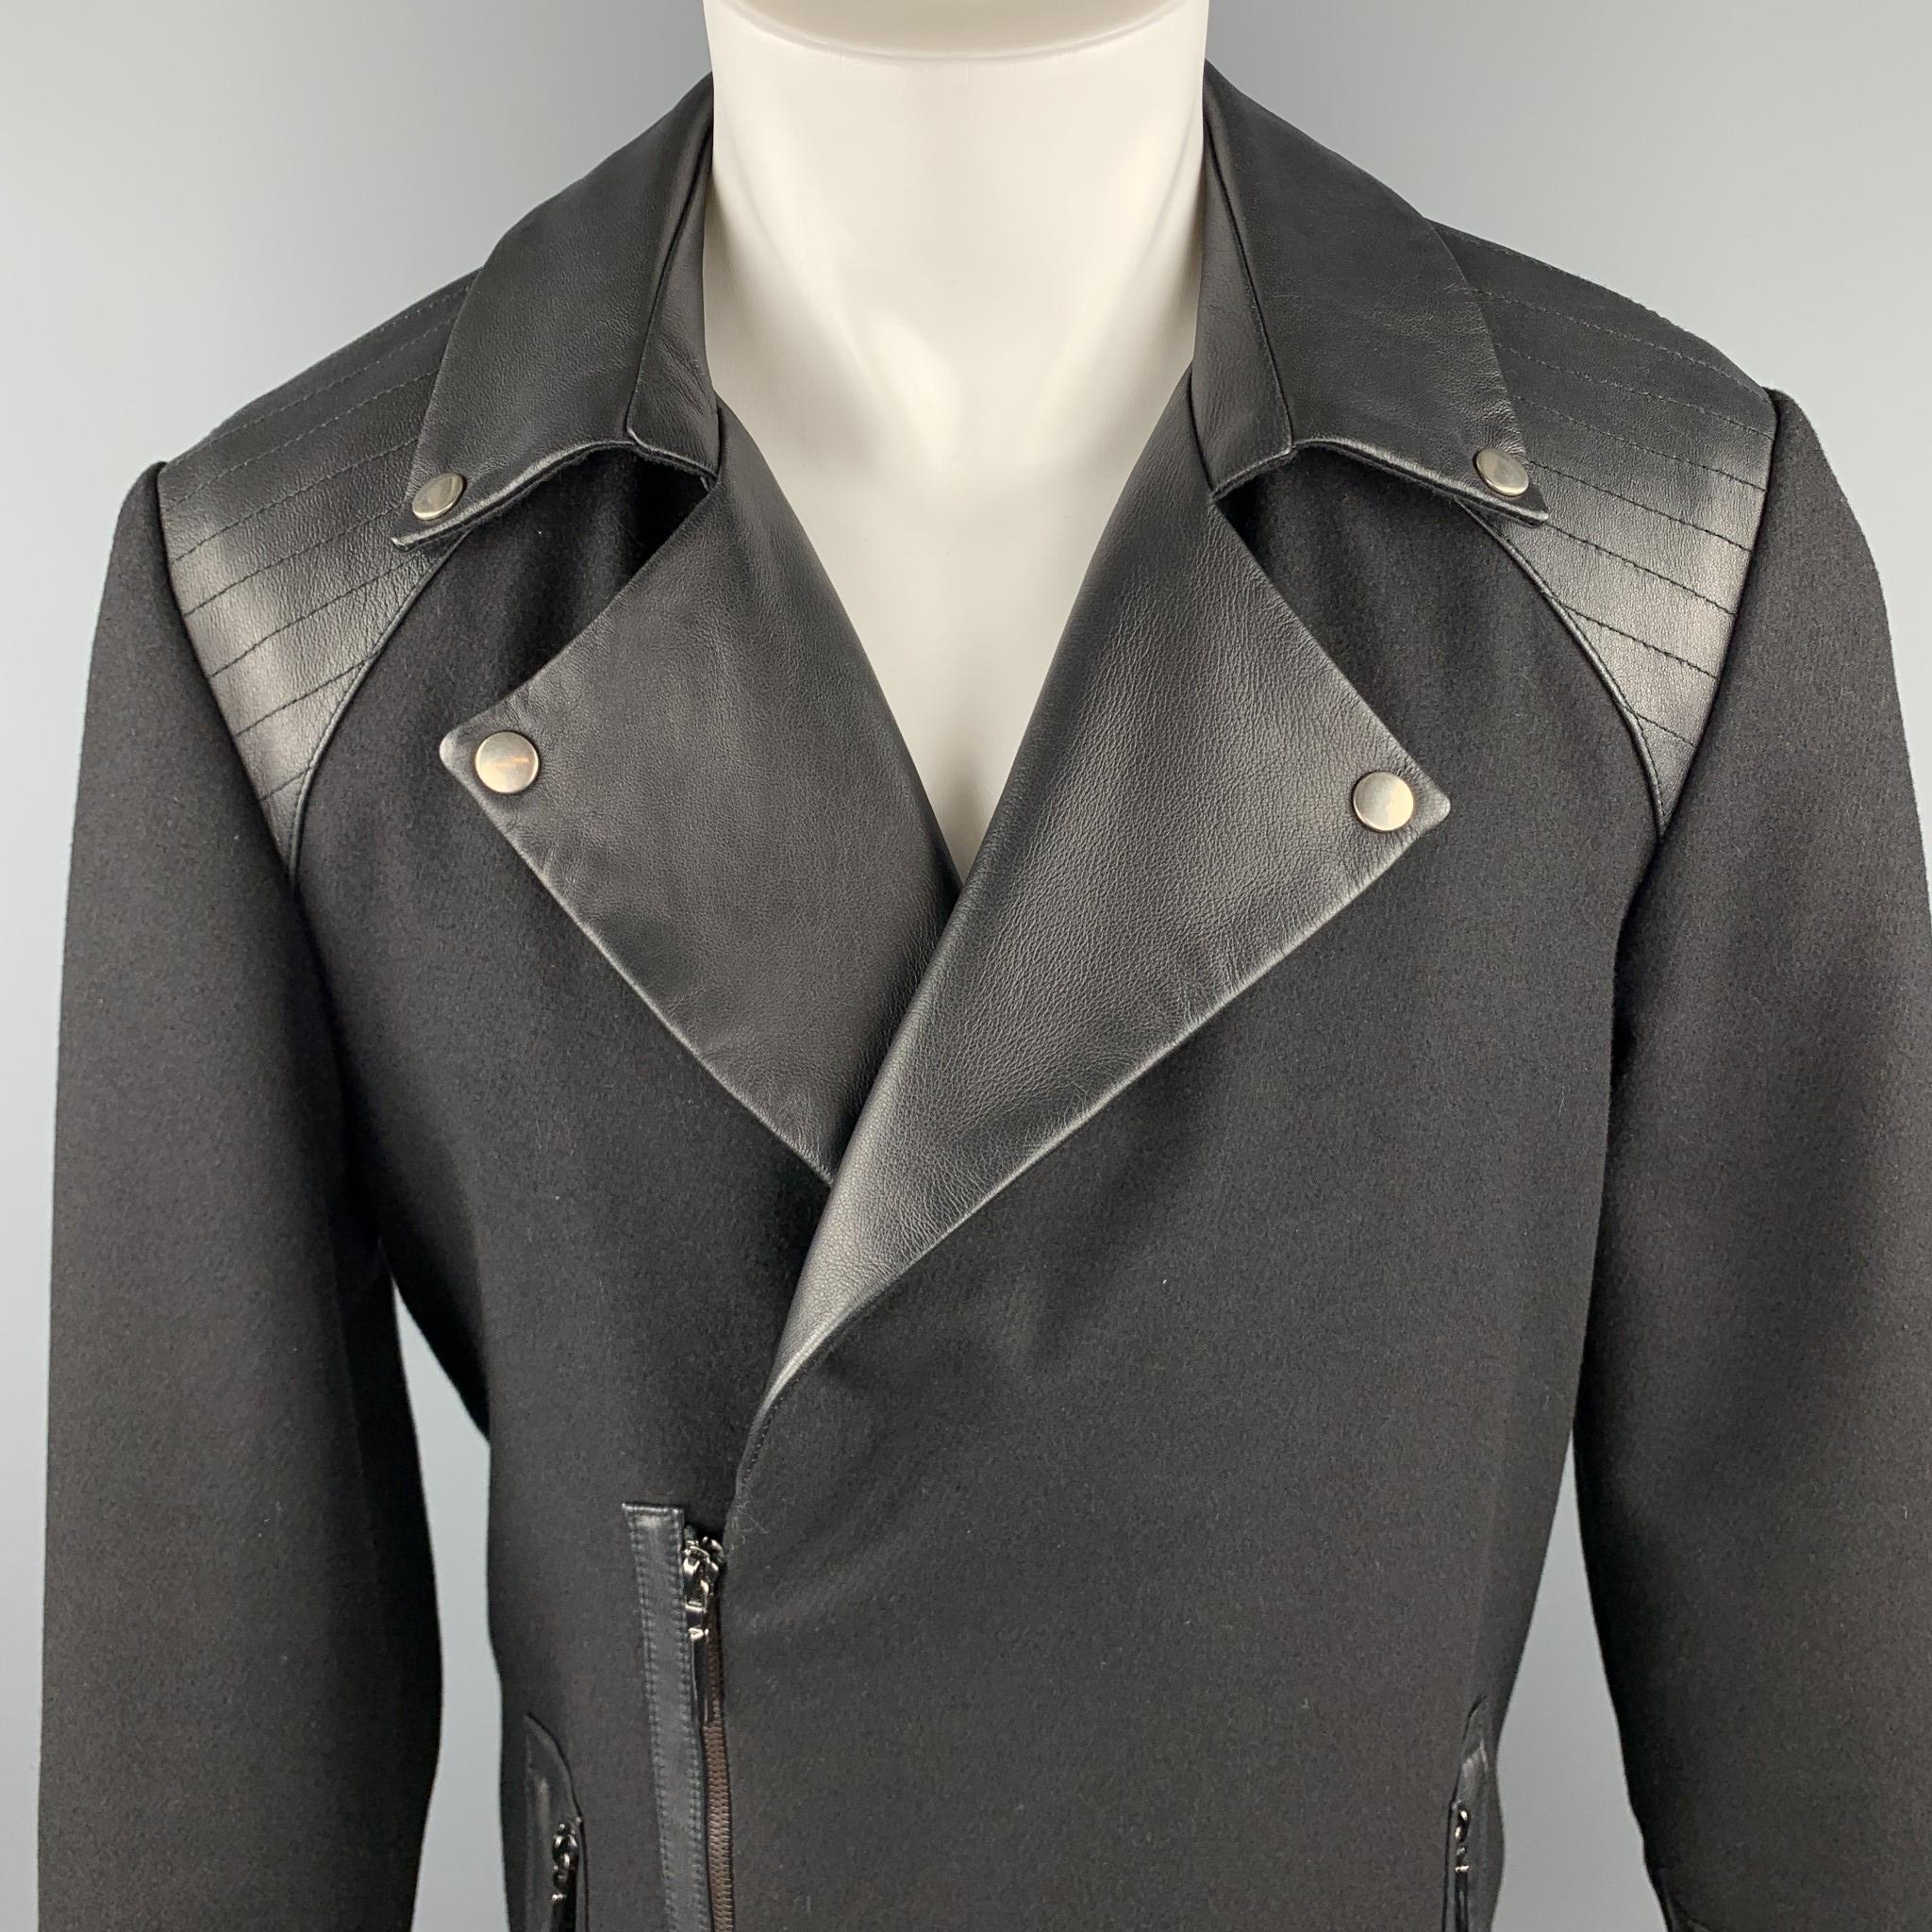 ROYGBM Artful Gentleman coat comes in black wool  with an asymmetrical zip closure, zip pockets, and leather quilted shoulders, cuffs, and biker lapel.  Made in USA.

Excellent Pre-Owned Condition.
Marked: M

Measurements:

Shoulder: 18 in.
Chest: